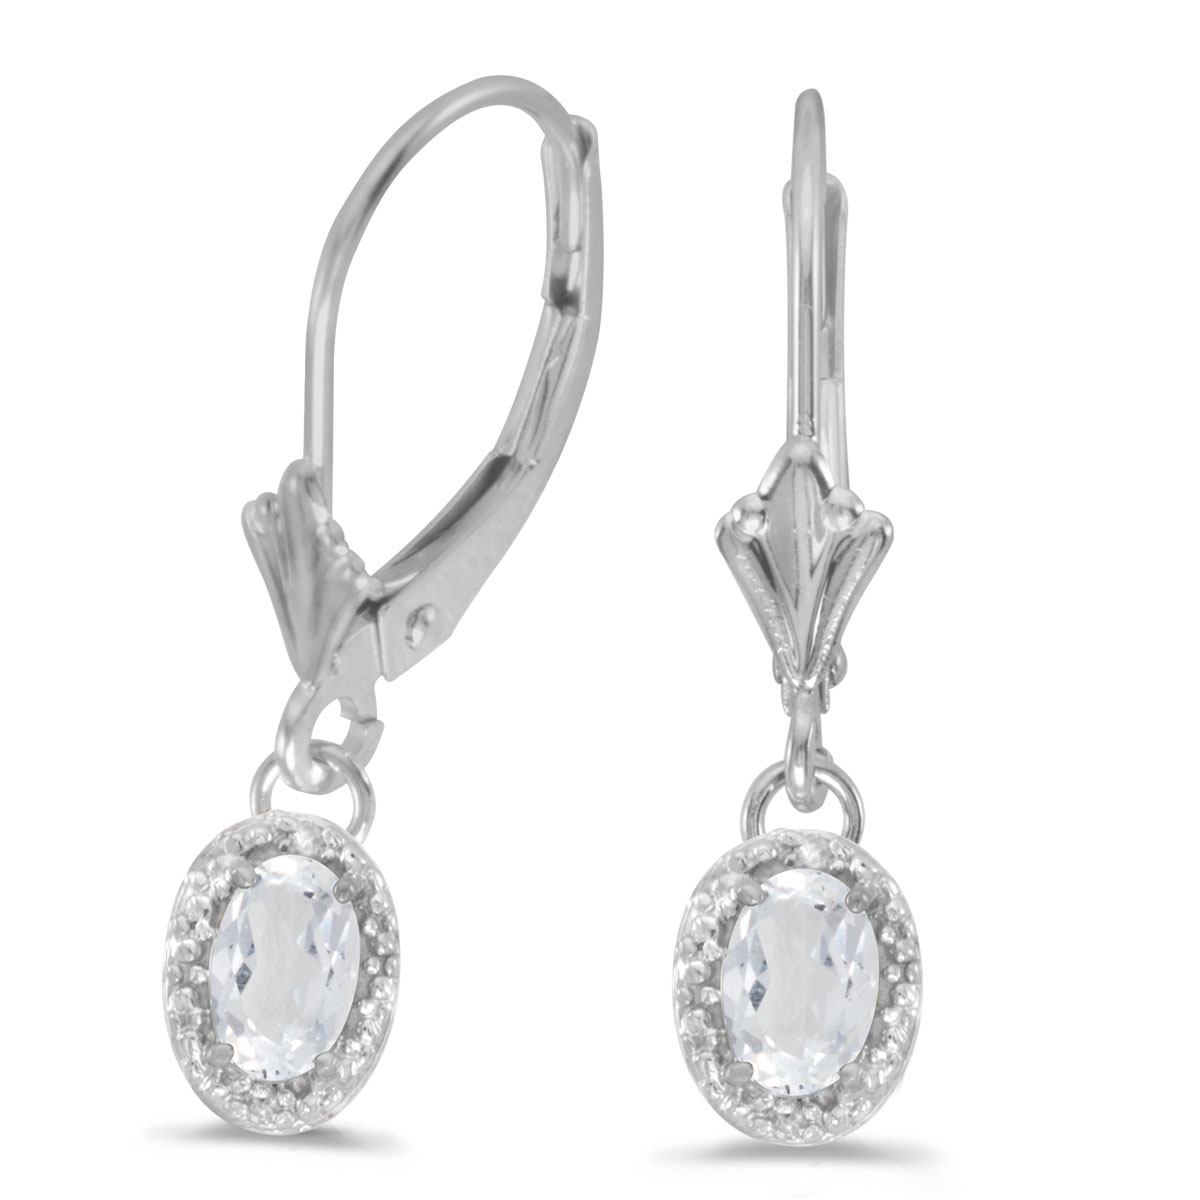 JCX2124: Beautiful 10k white gold leverback earrings with gorgeous 6x4 mm white topaz stones complemented with bright diamonds.